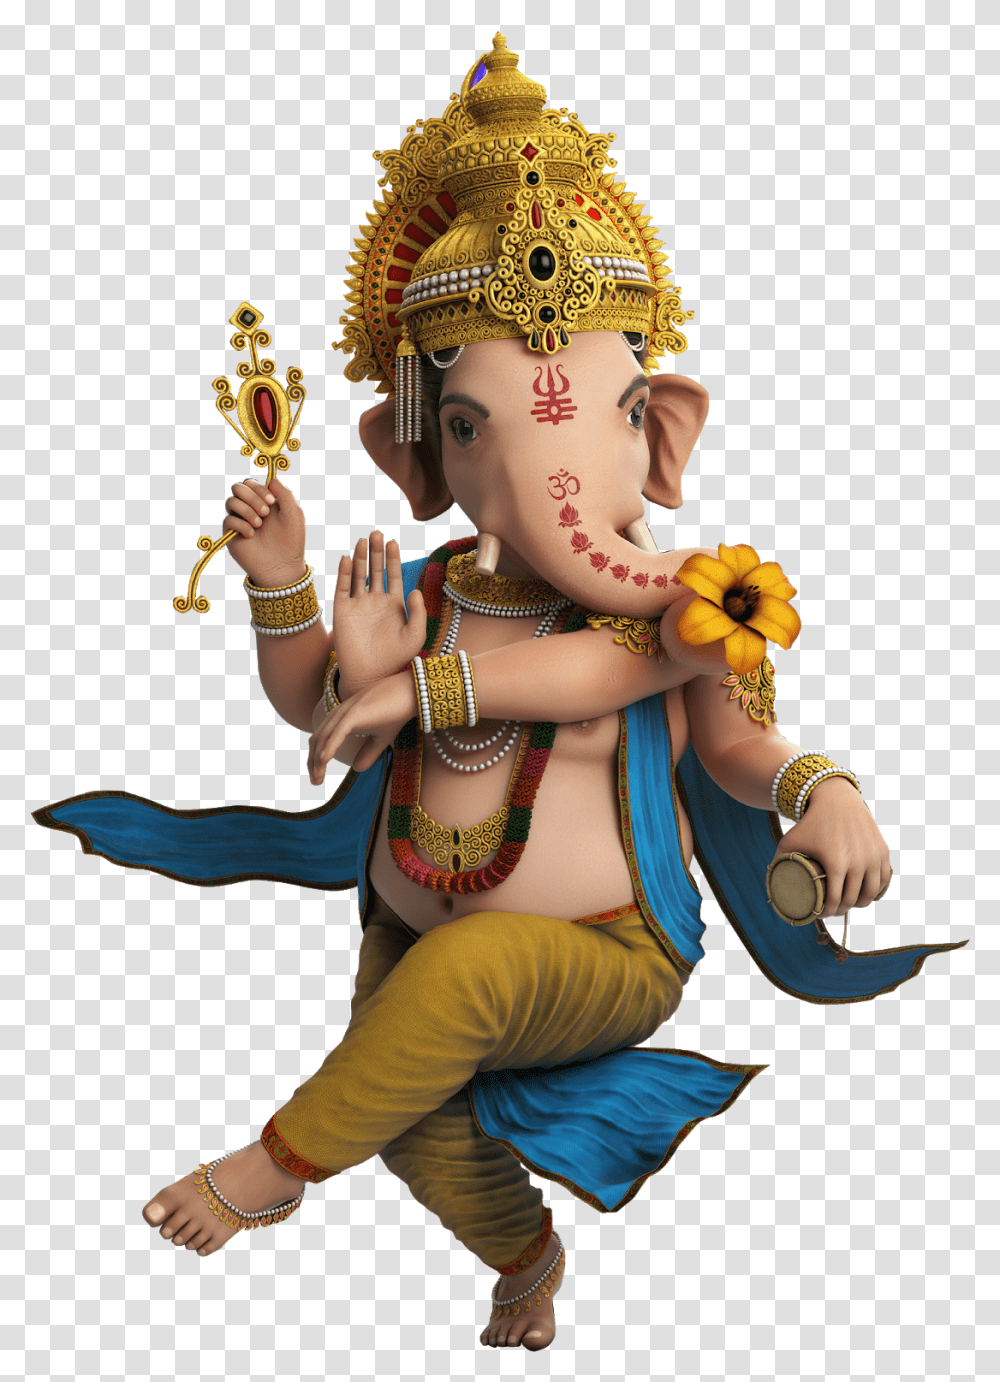 Ganpati Background Hd For Editing, Accessories, Person, Dance Pose, Leisure Activities Transparent Png